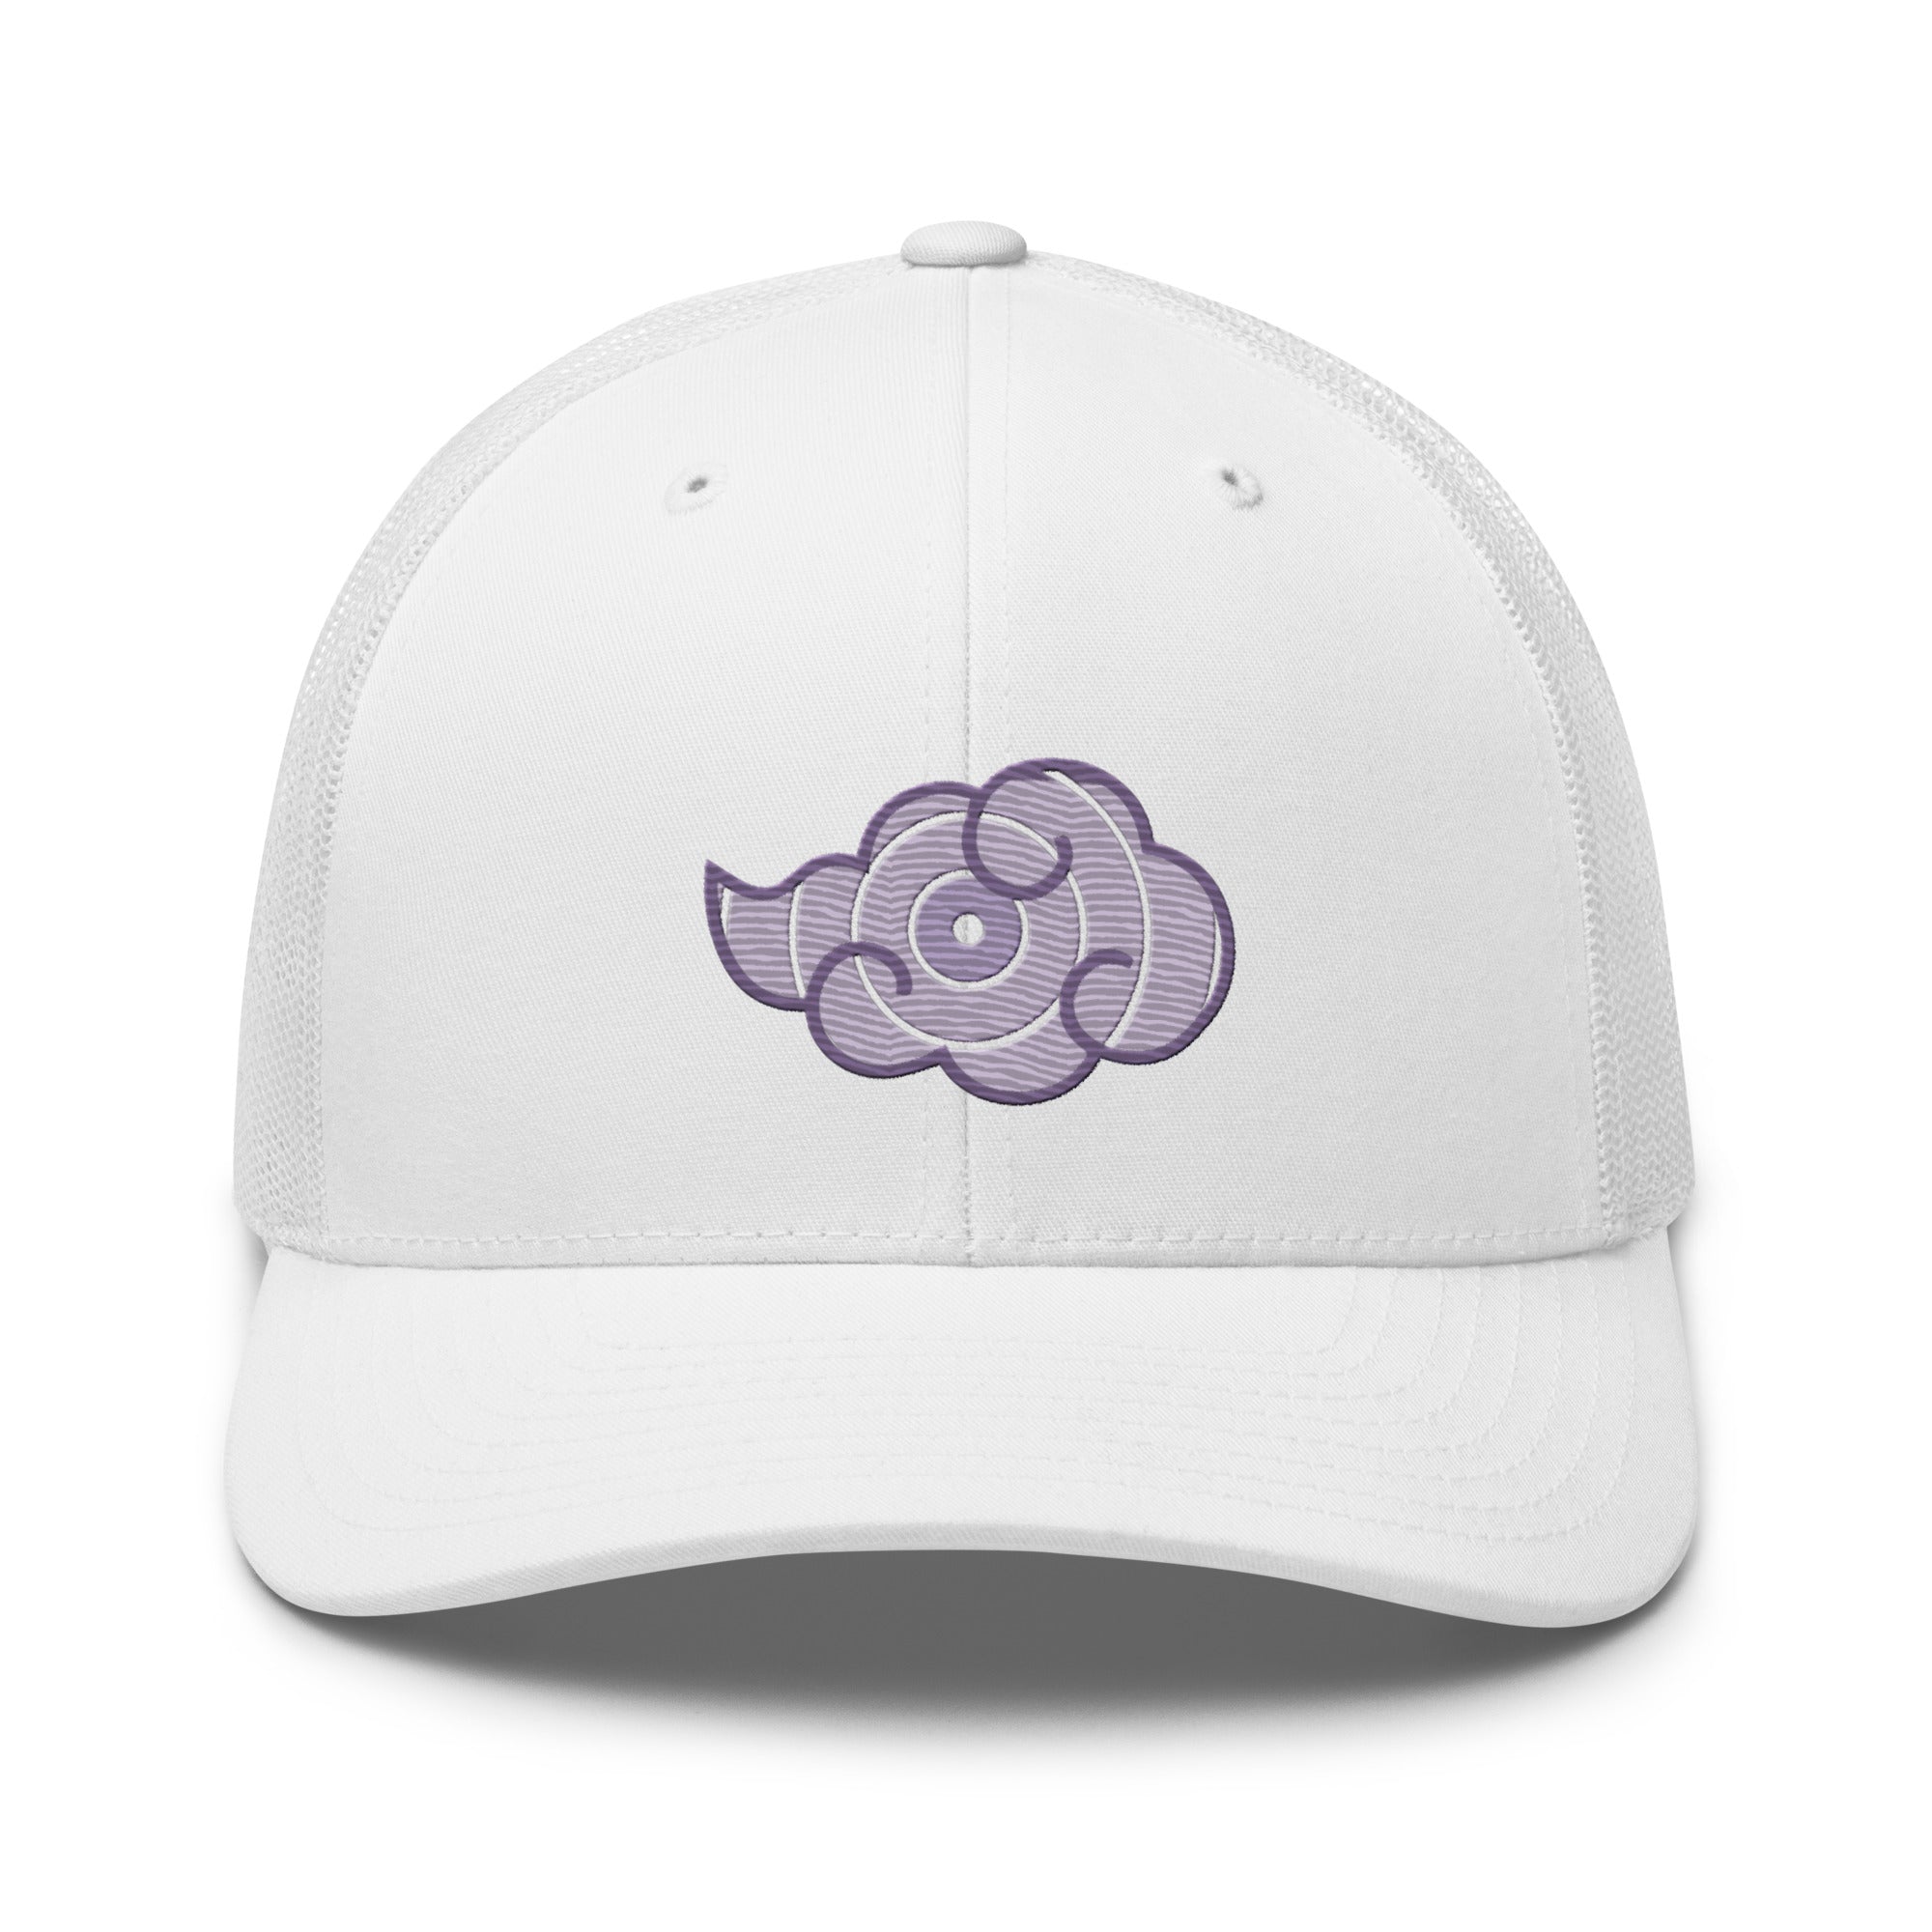 PAIN Cloud Embroidered Trucker Hat